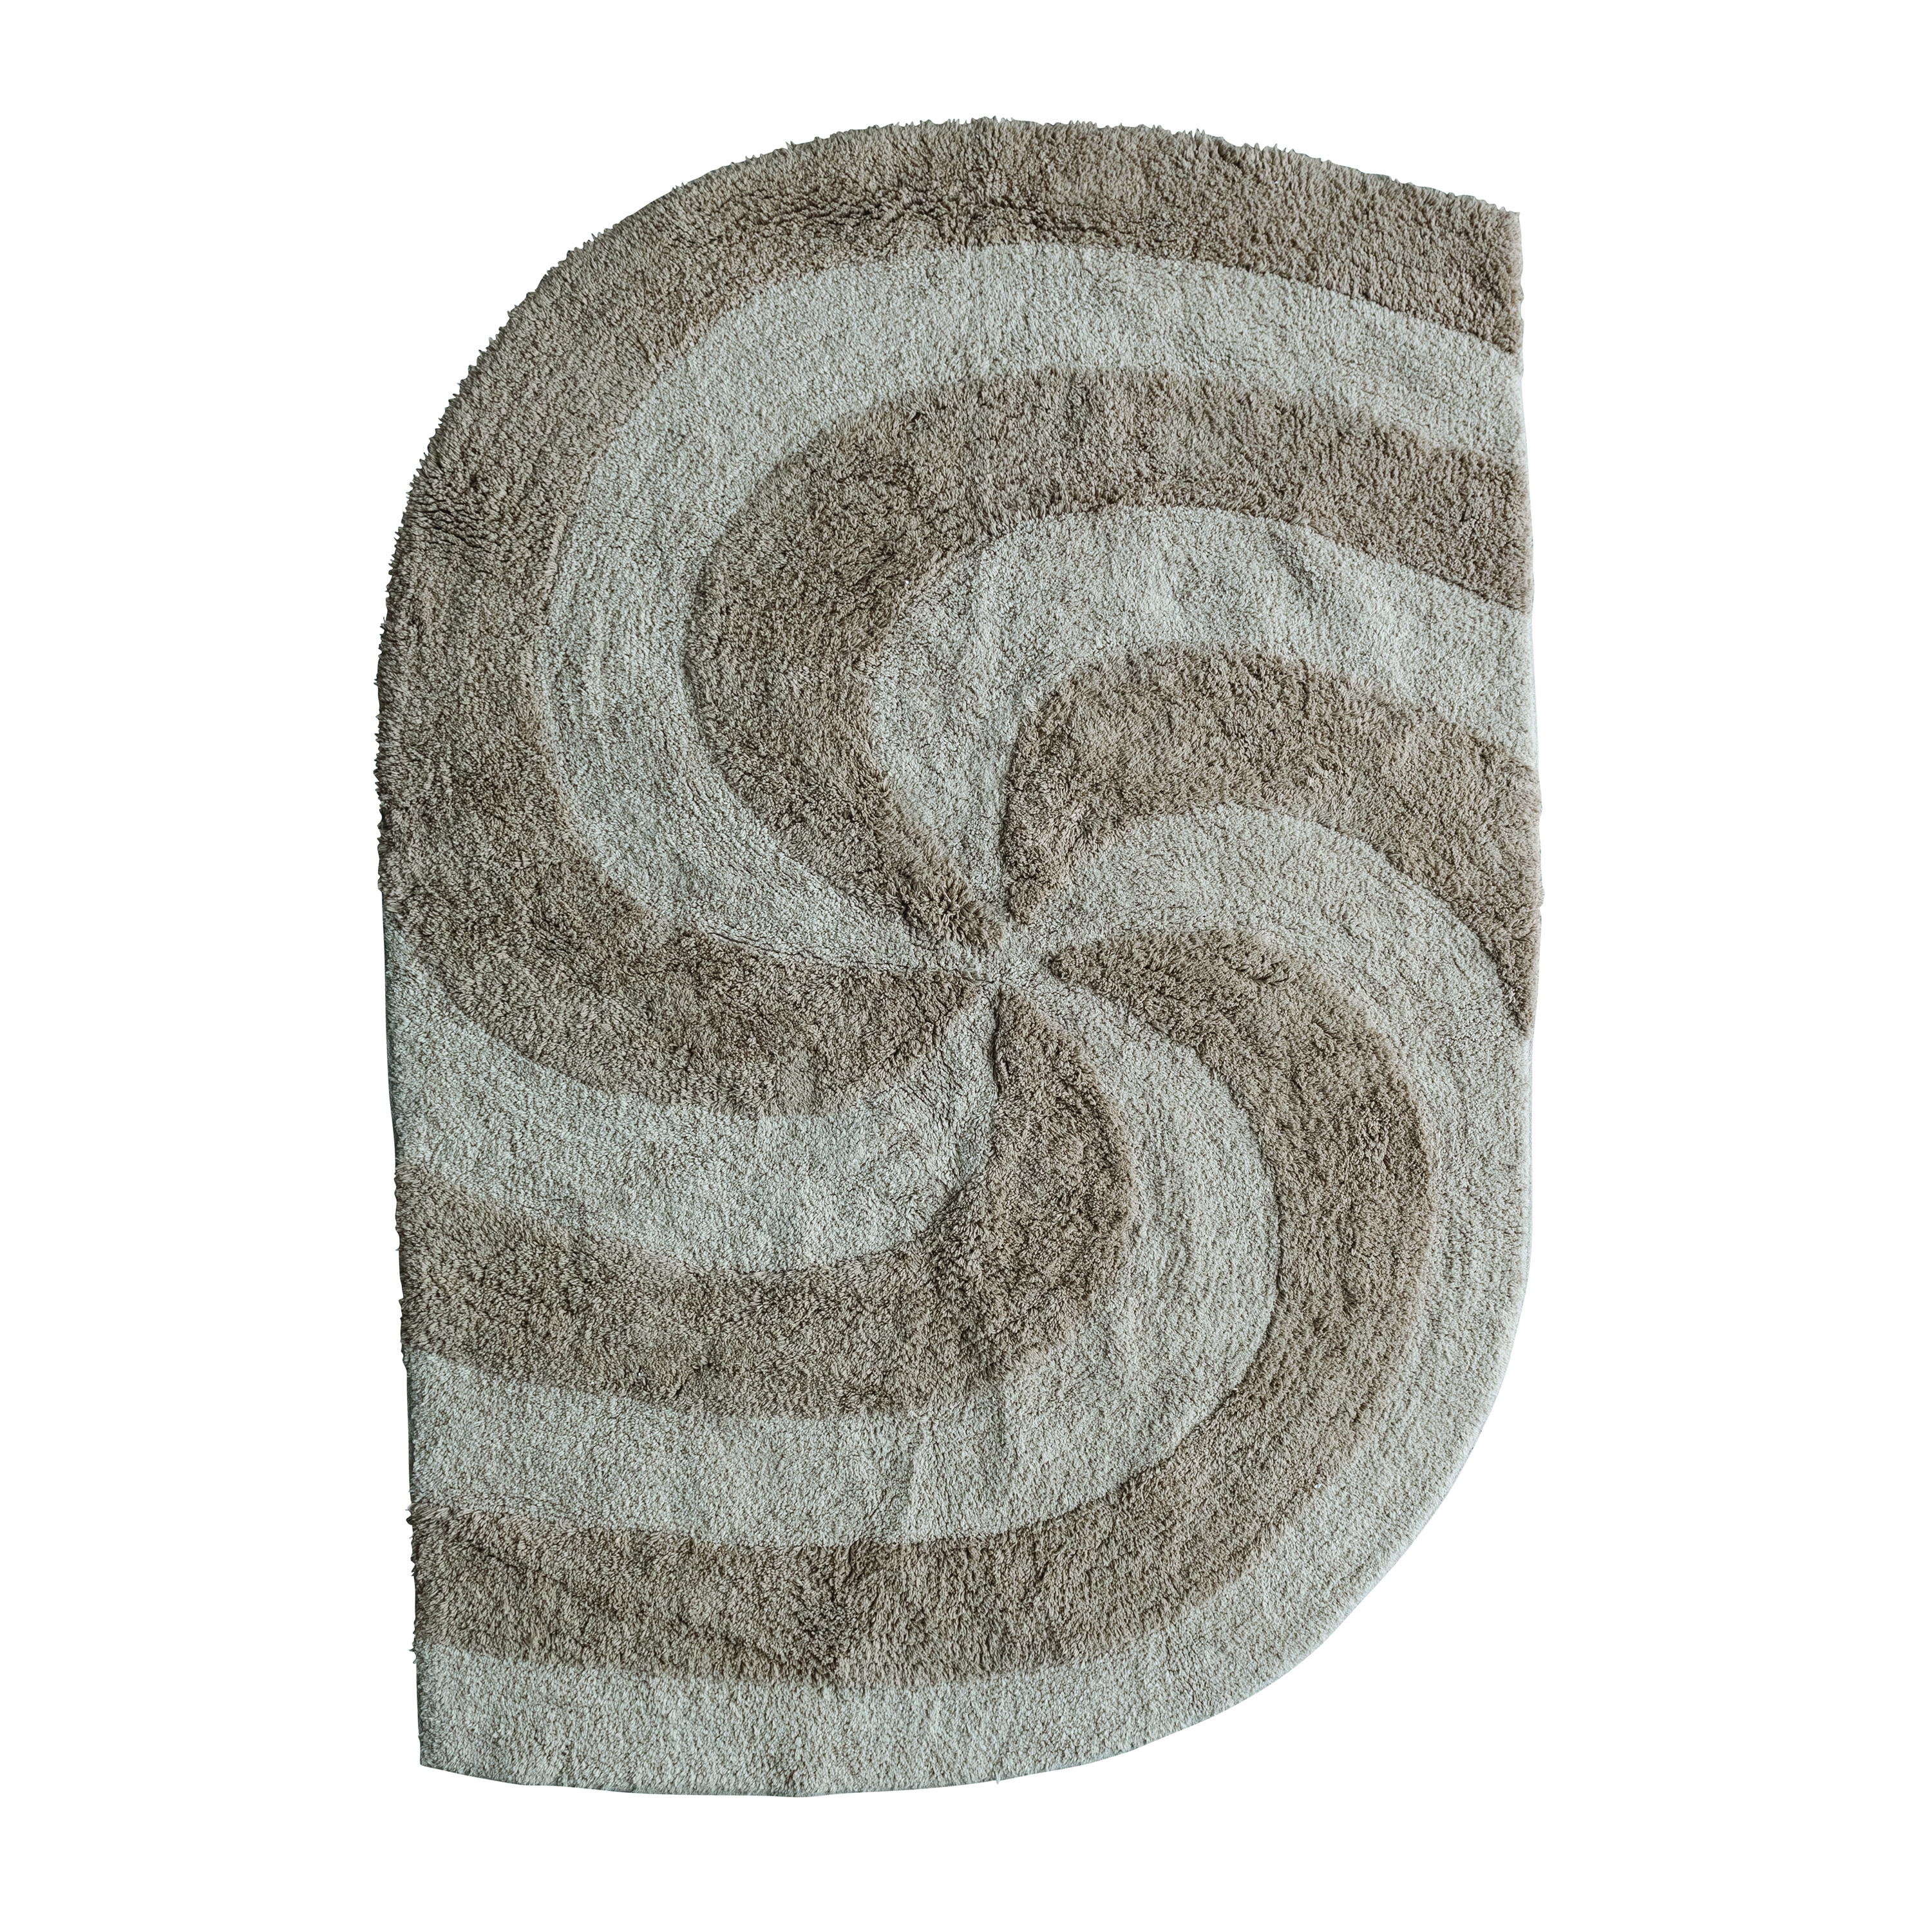 4.5 Inches Cotton Tufted Rug with Varying Pile and Spiral Design, Tan and Beige - Image 0